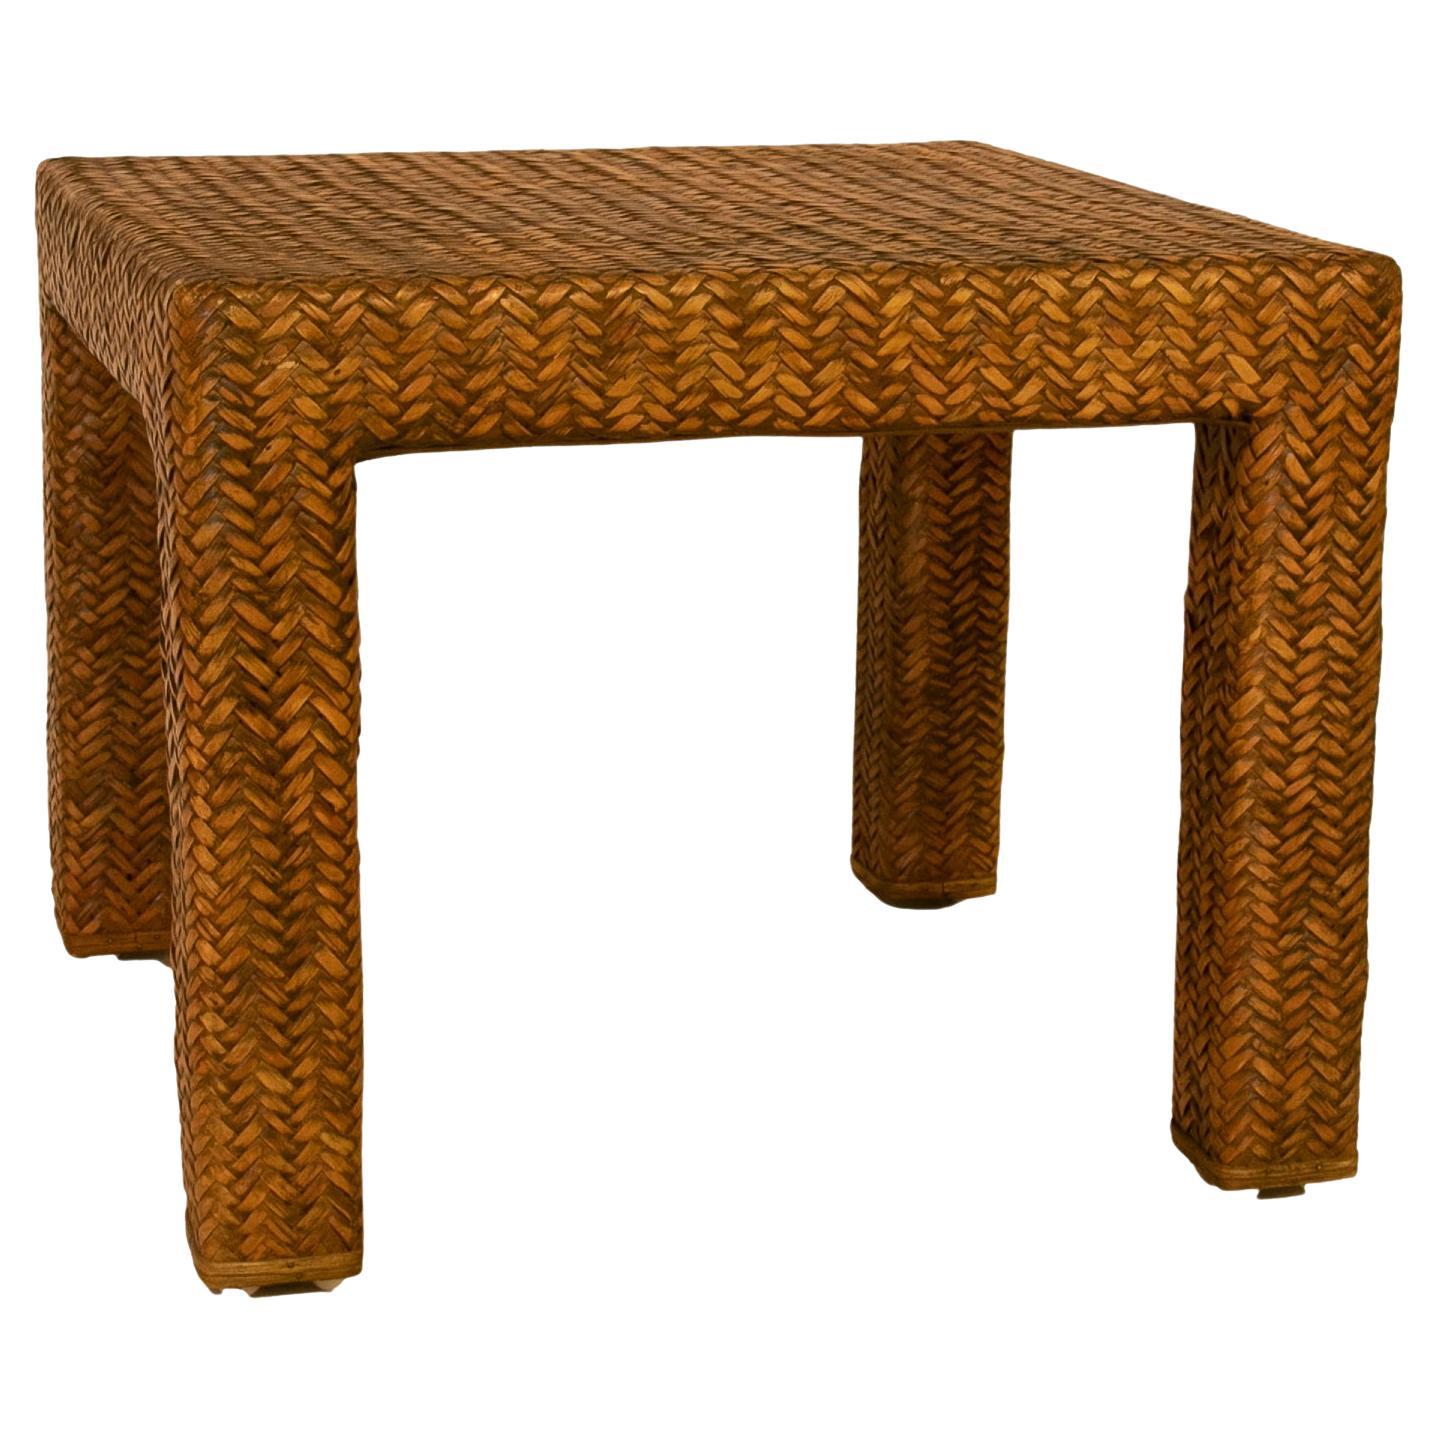 1990s Square Rattan Side Table  For Sale